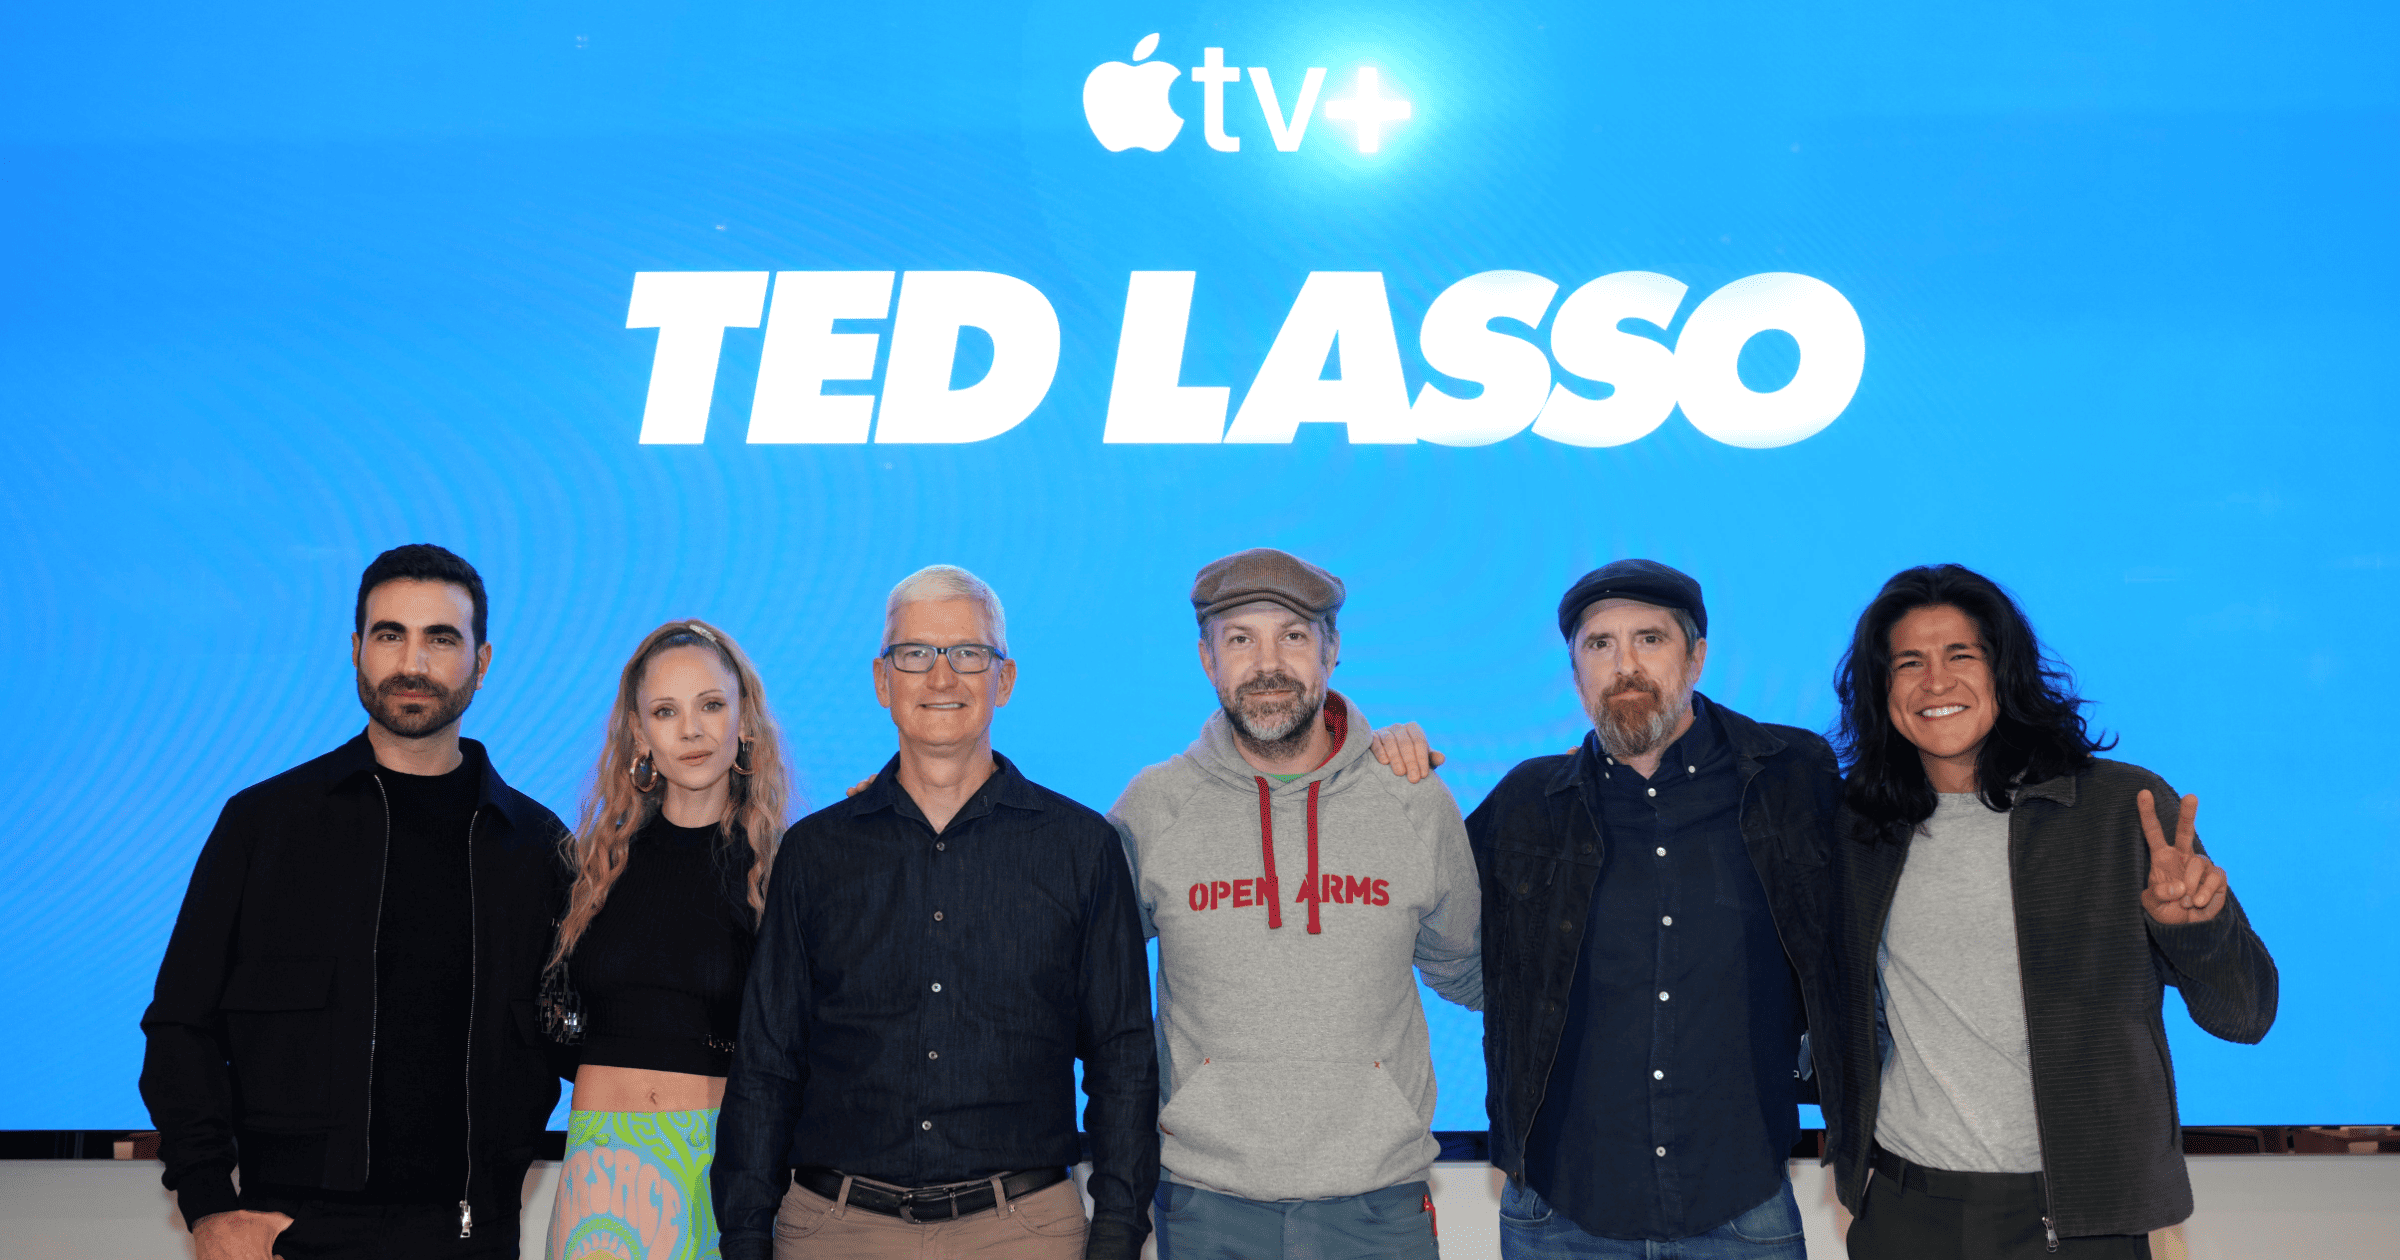 Ted Lasso Stars Attend Q and A as Apple The Grove Reopens [Updated]